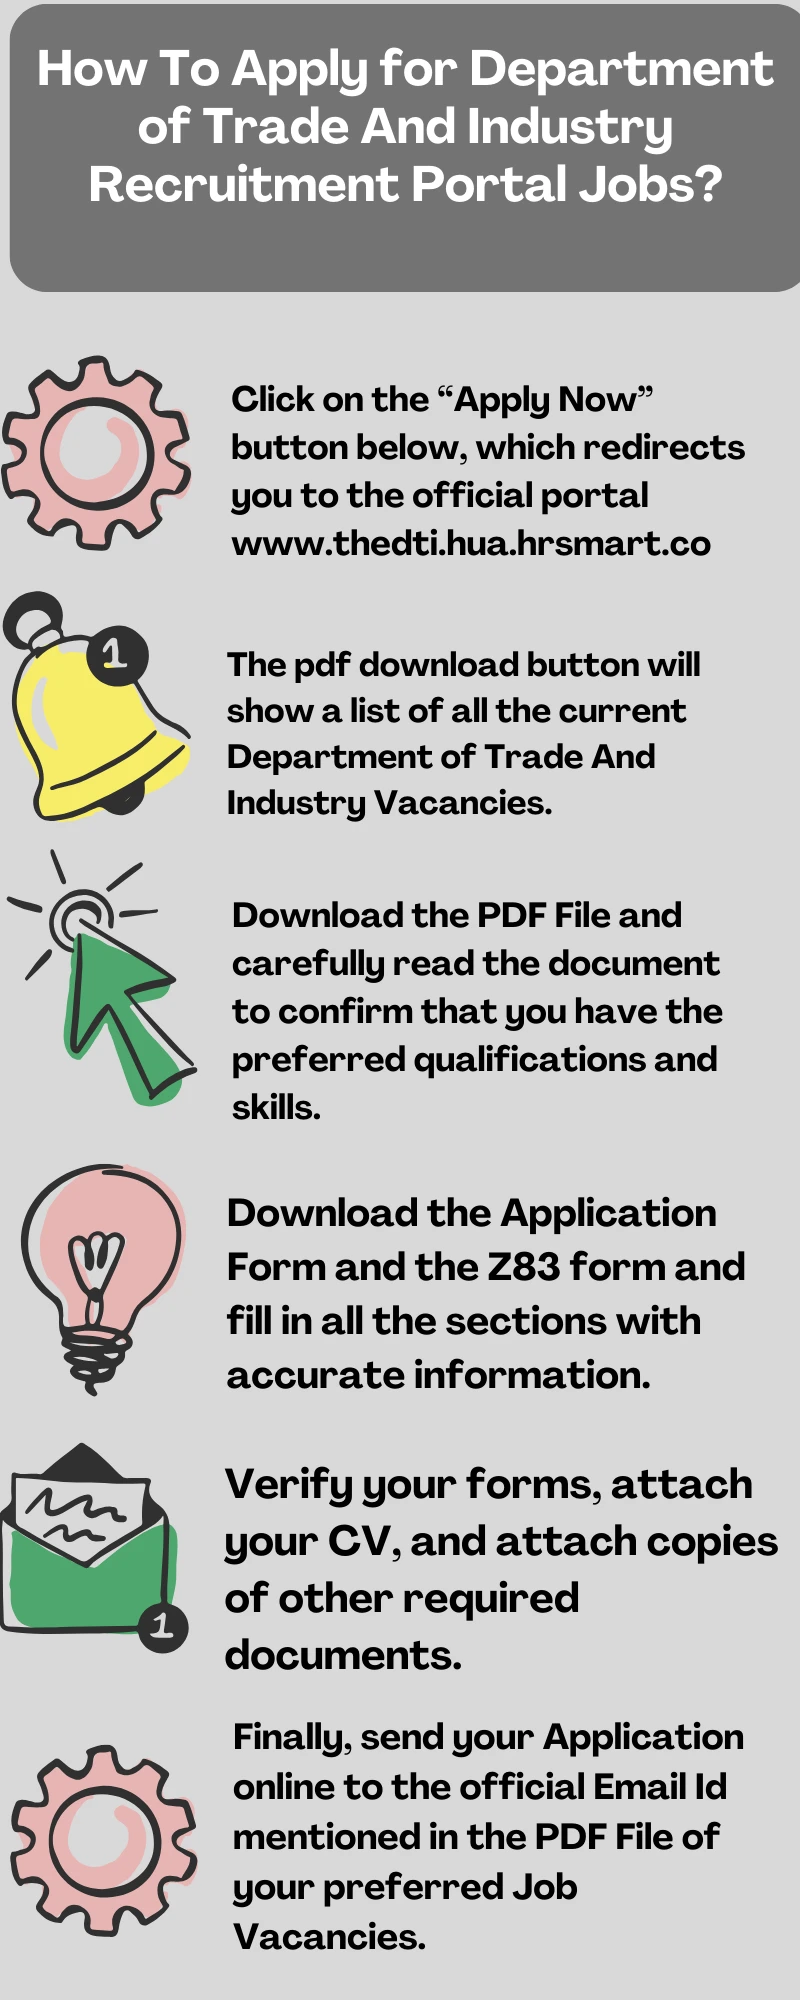 How To Apply for Department of Trade And Industry Recruitment Portal Jobs?